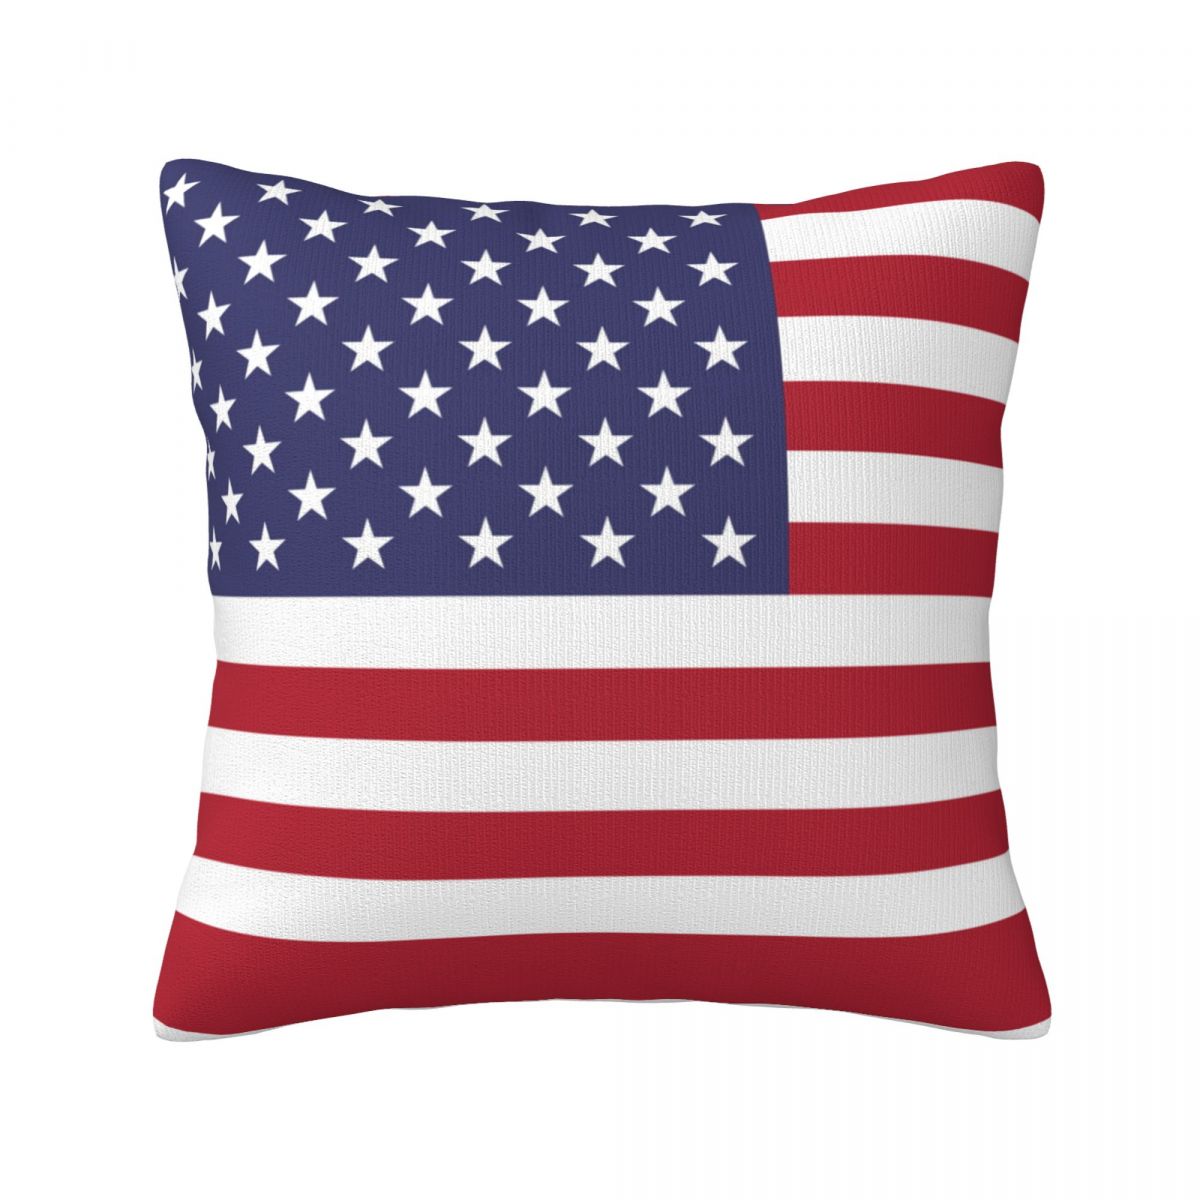 United States Flag Decorative Square Throw Pillow Covers